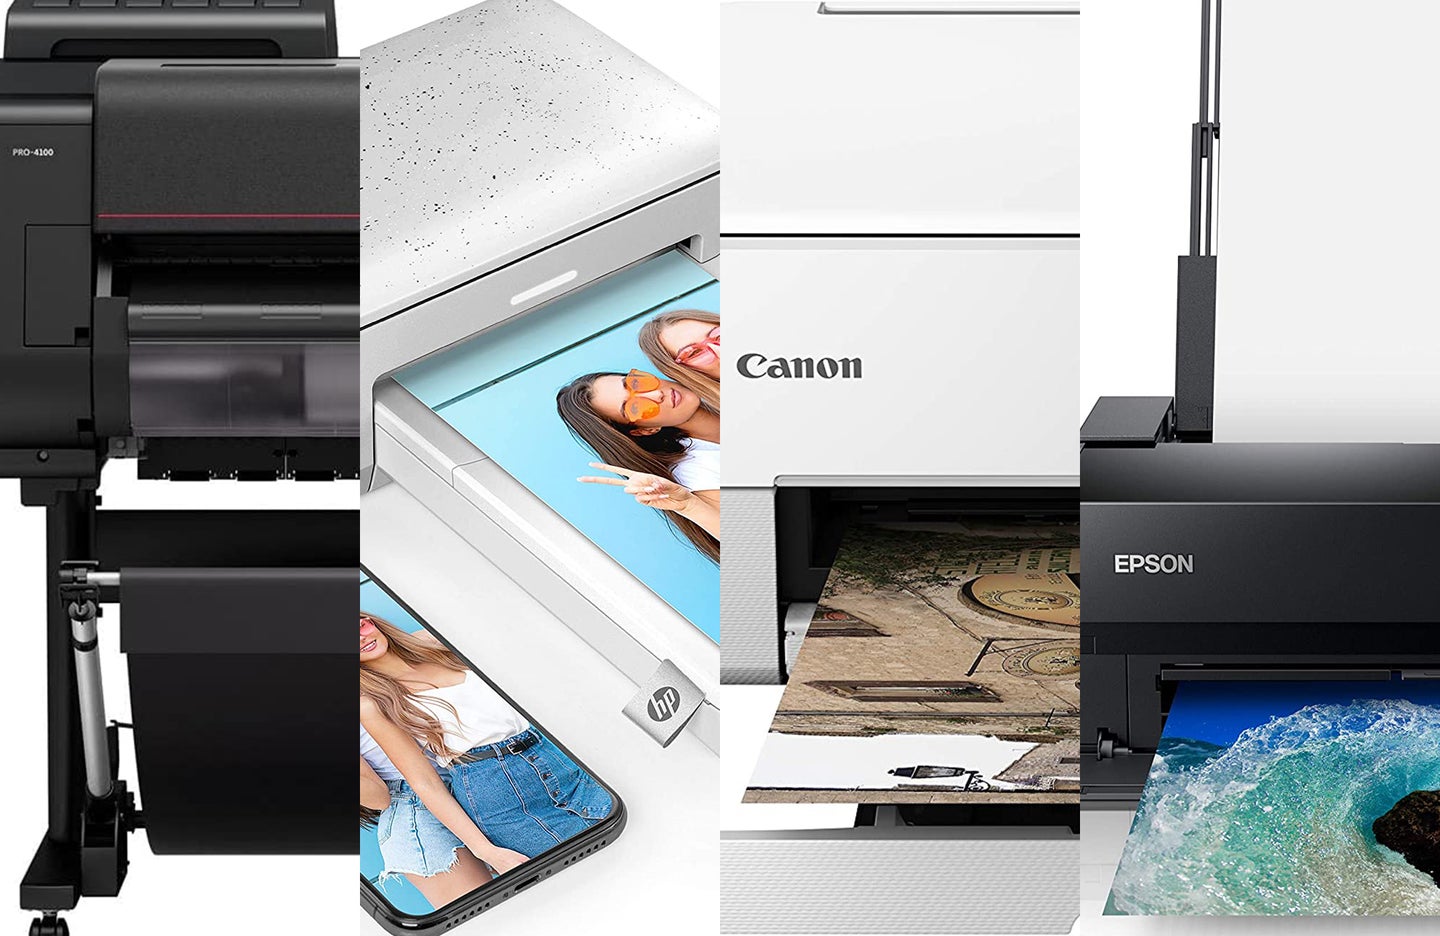 These are the best printers for photos.